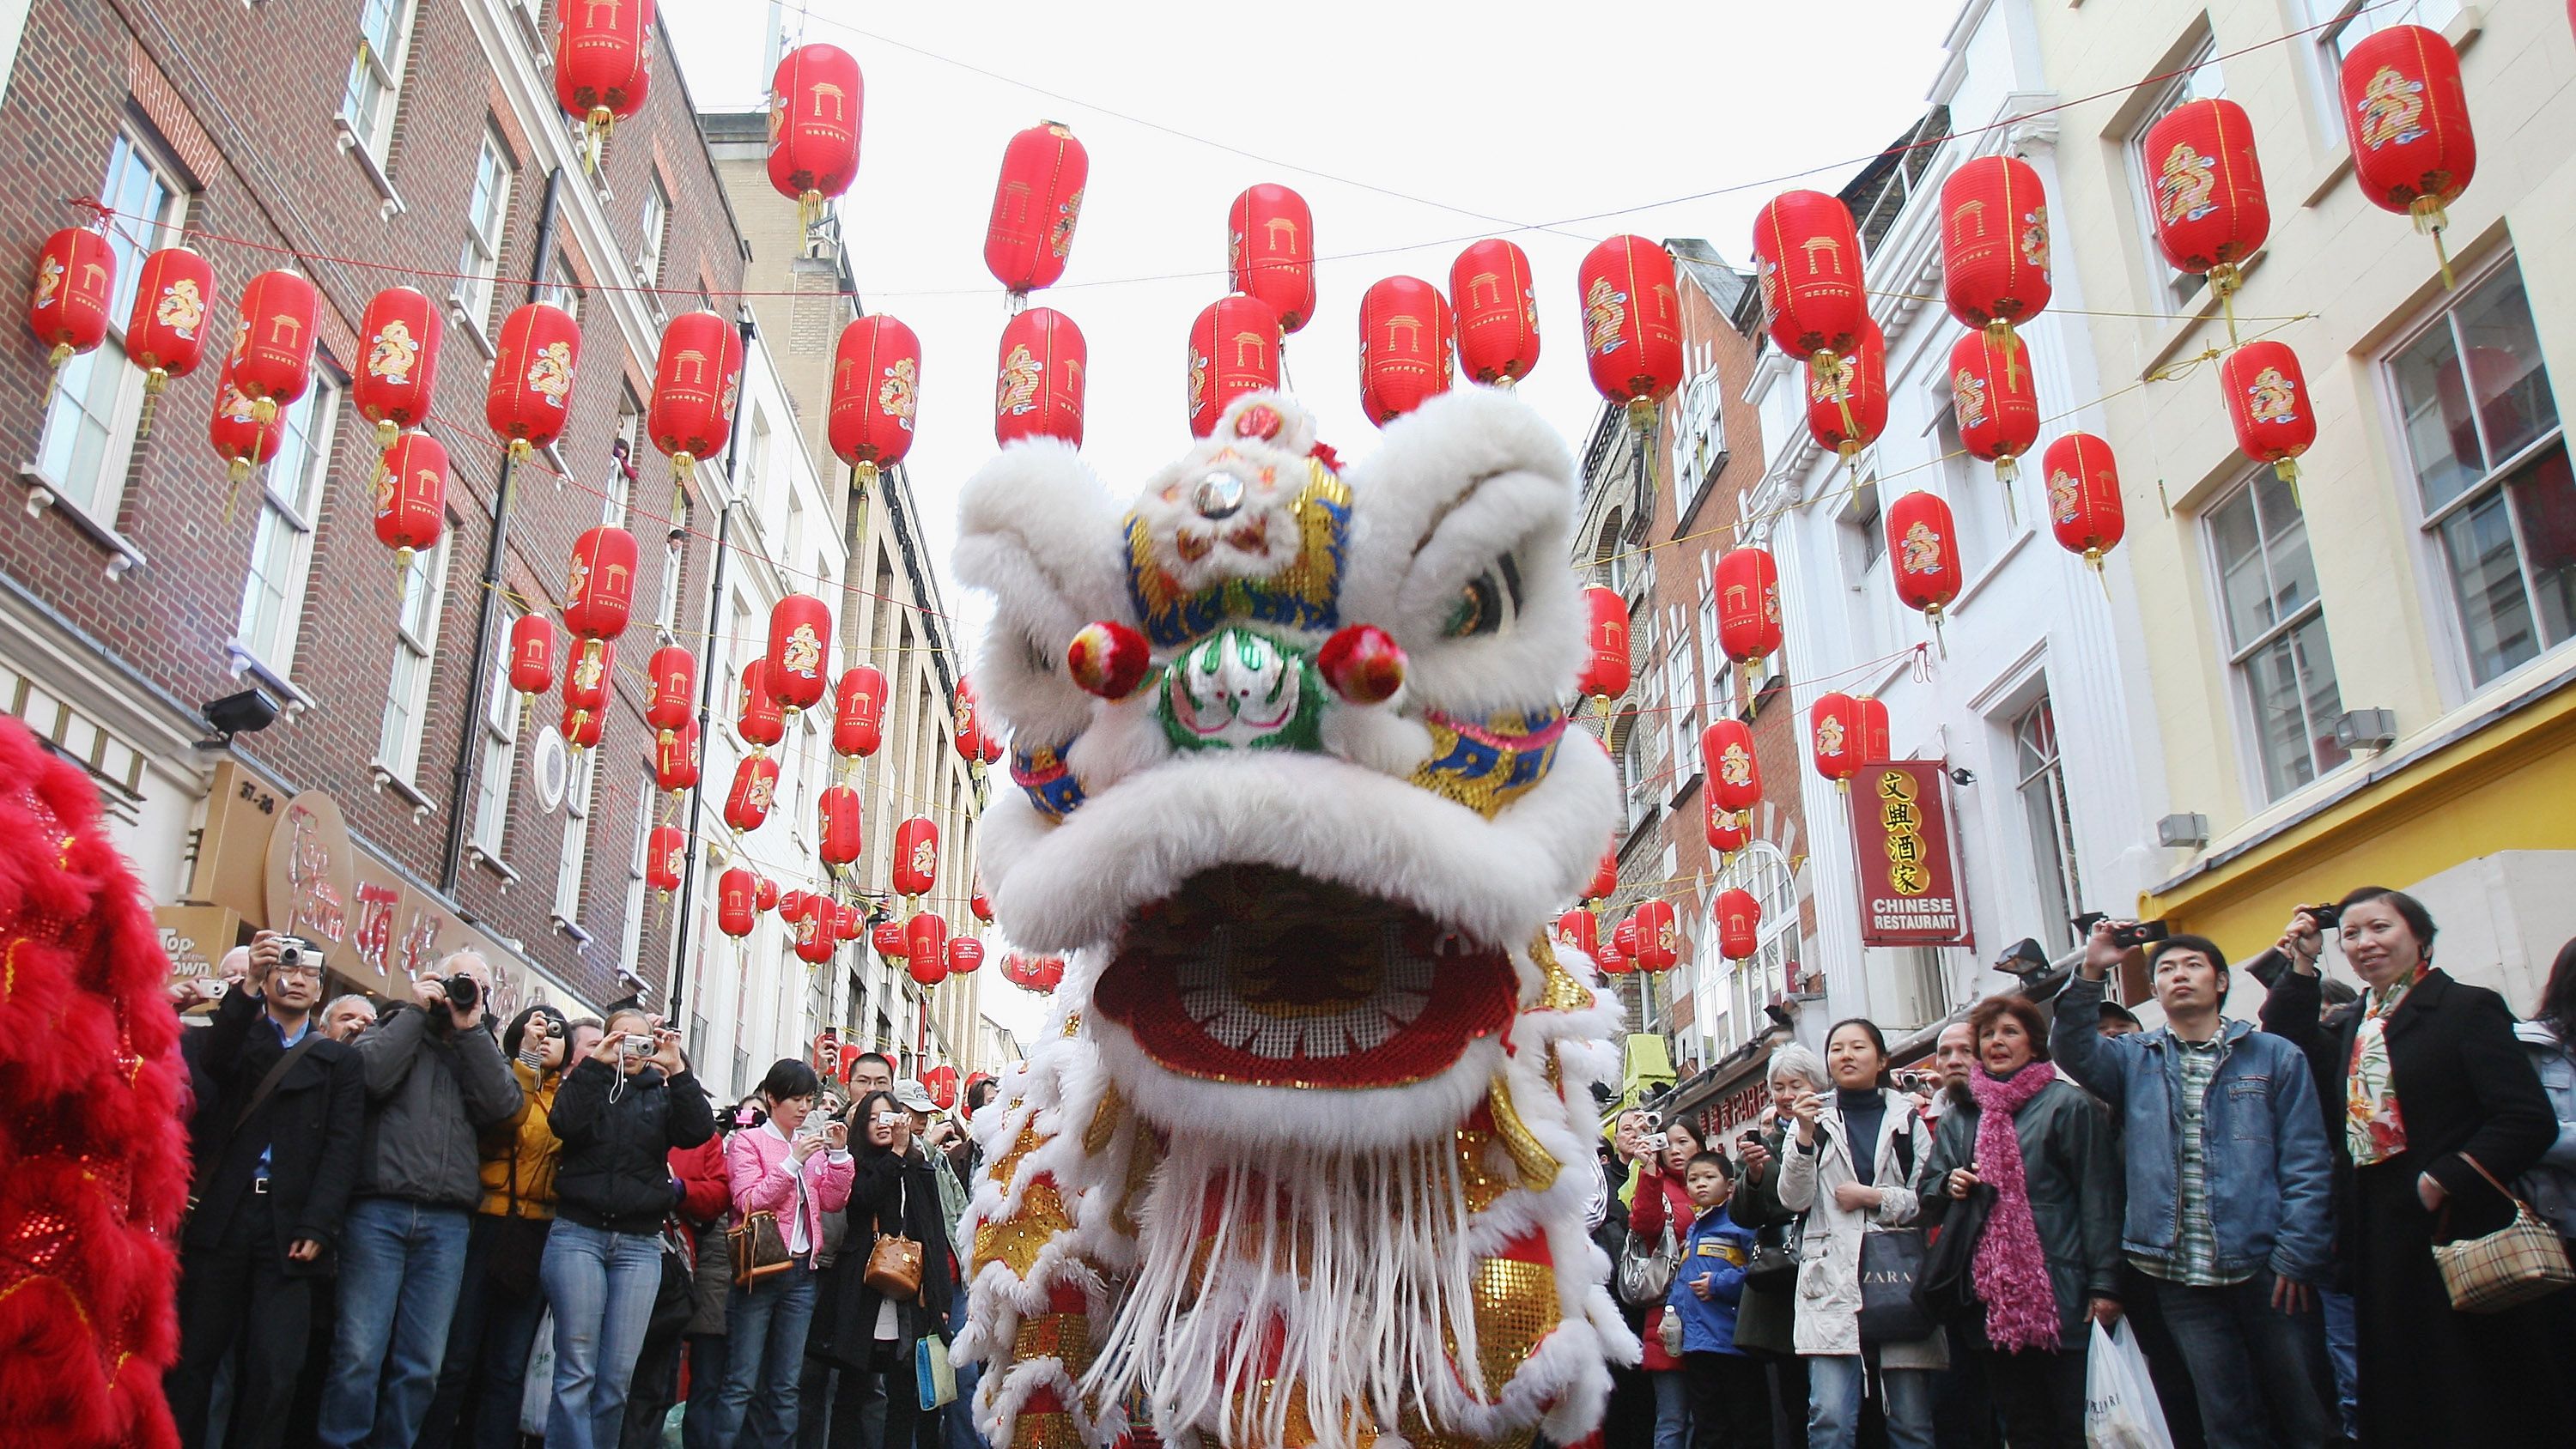 Chinese New Year 2023, Facts for Kids, Lunar New Year